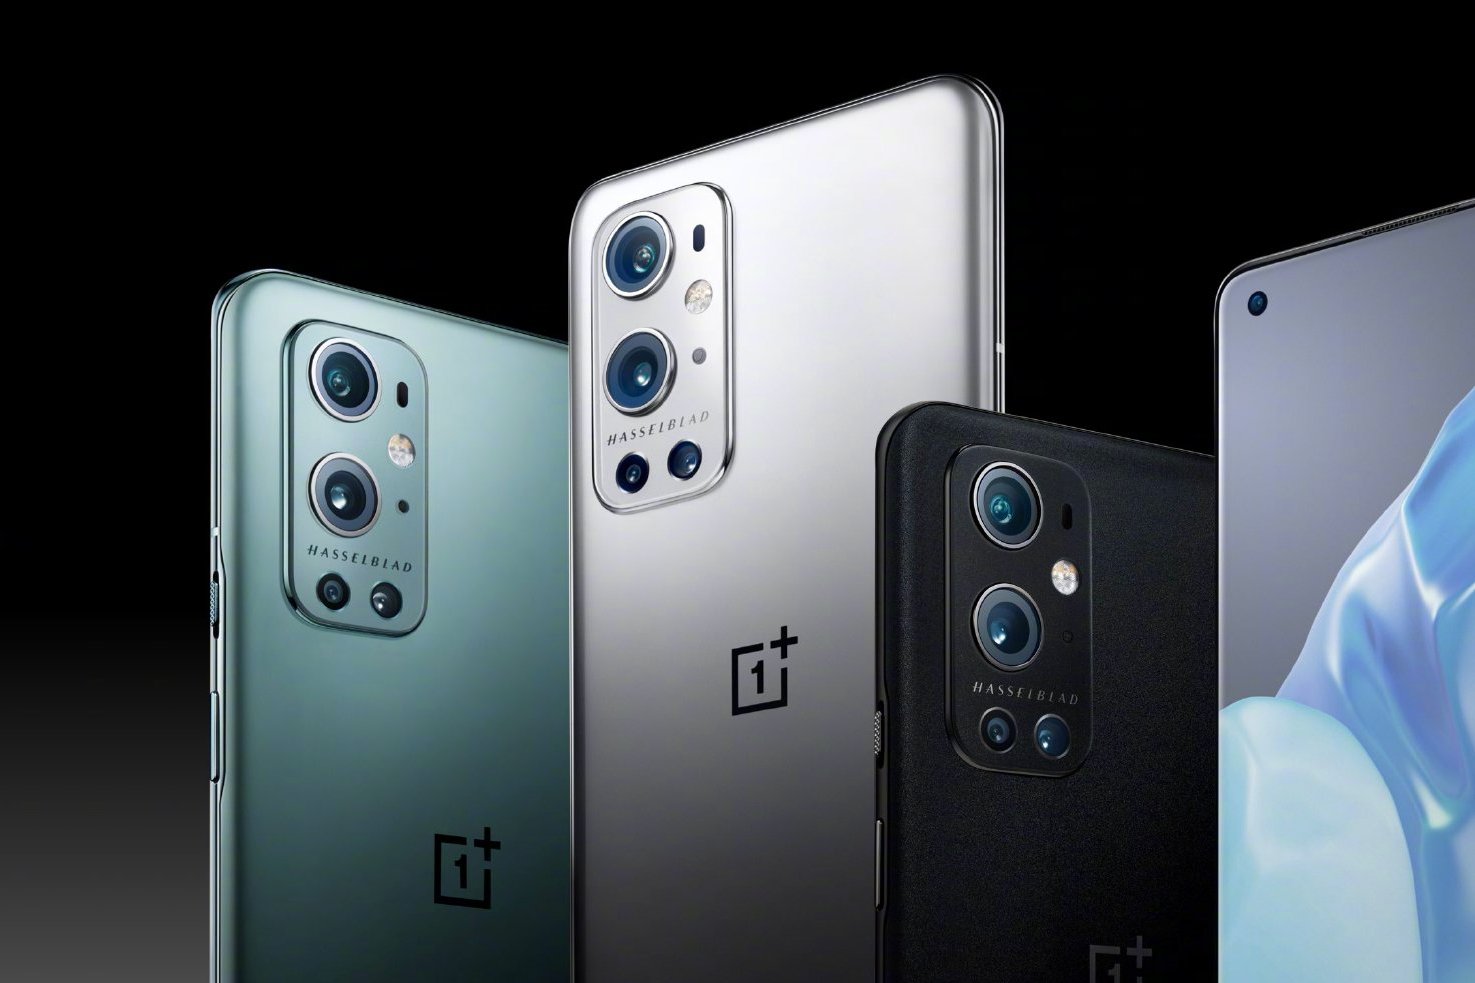 We might not get a OnePlus 9T this year, or ever, after all